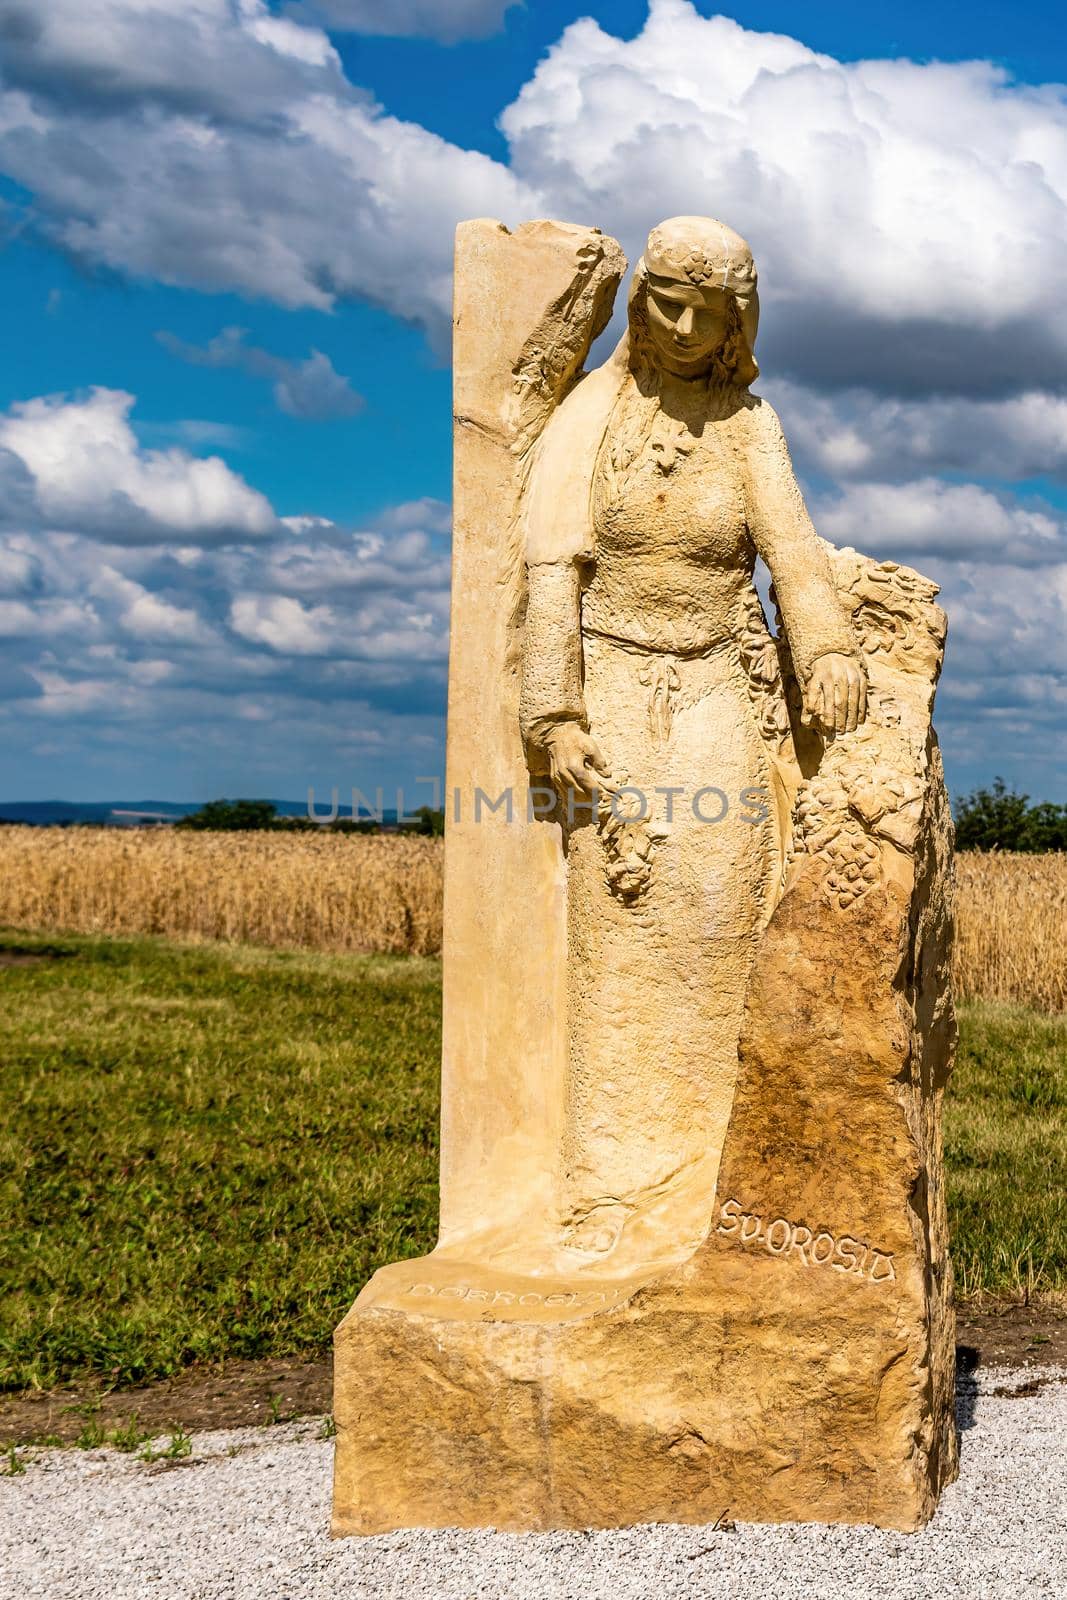 Ratiskovice, Czech Republic - July 7 - The mythical hill of Naklo near Ratiskovice. Saint Dobroslava on Naklo hill near Ratiskovice. patroness of winegrowers and protector against bad weather.